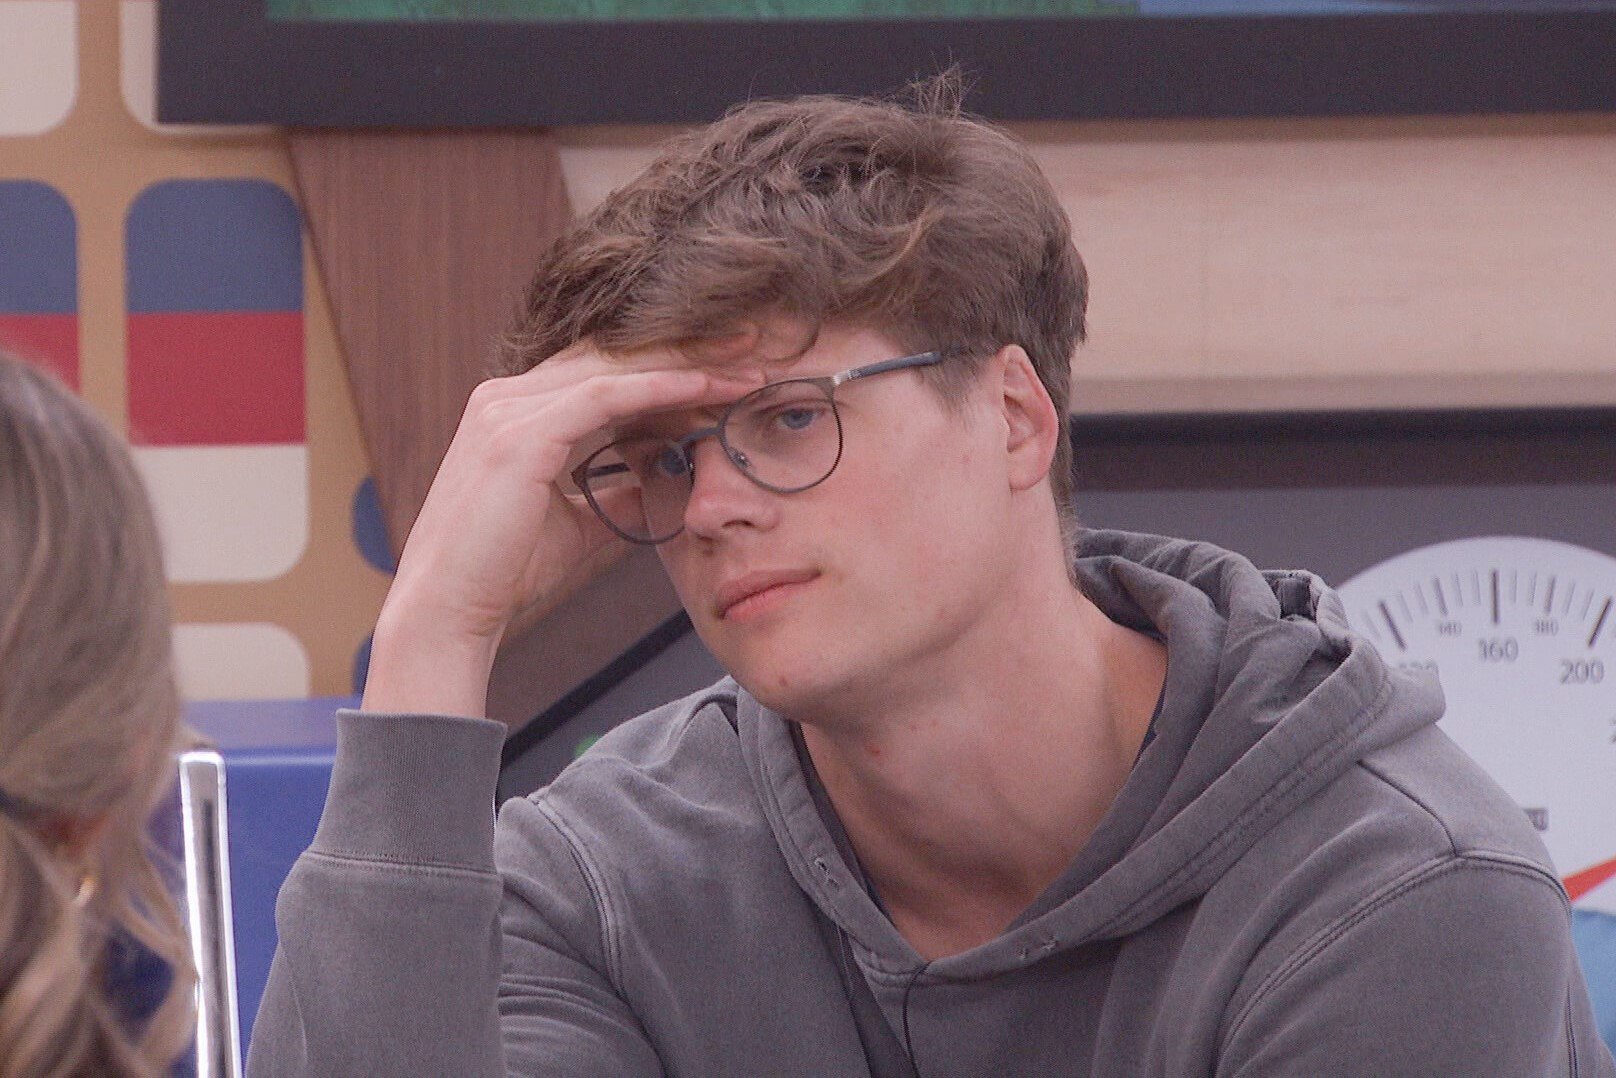 Kyle Capener, who stars in 'Big Brother 24' on CBS, wears a gray hoodie and glasses.